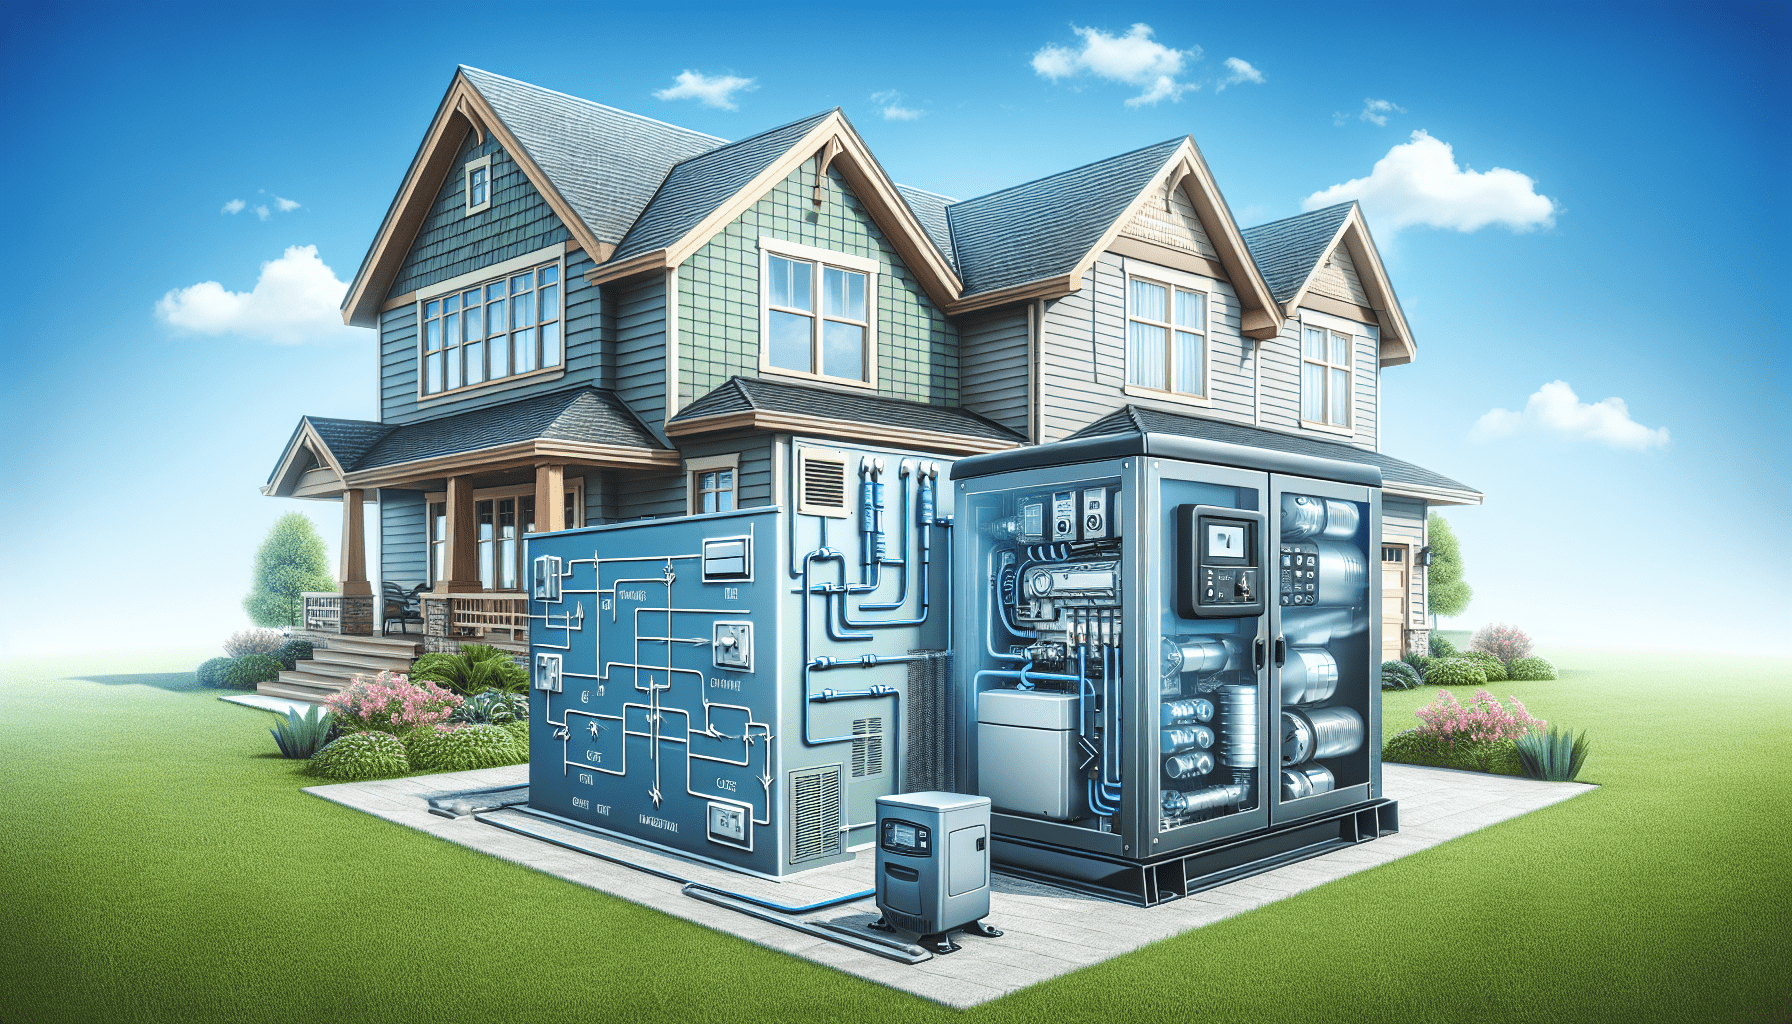 Does A Home Power Backup Require A Permit To Install?